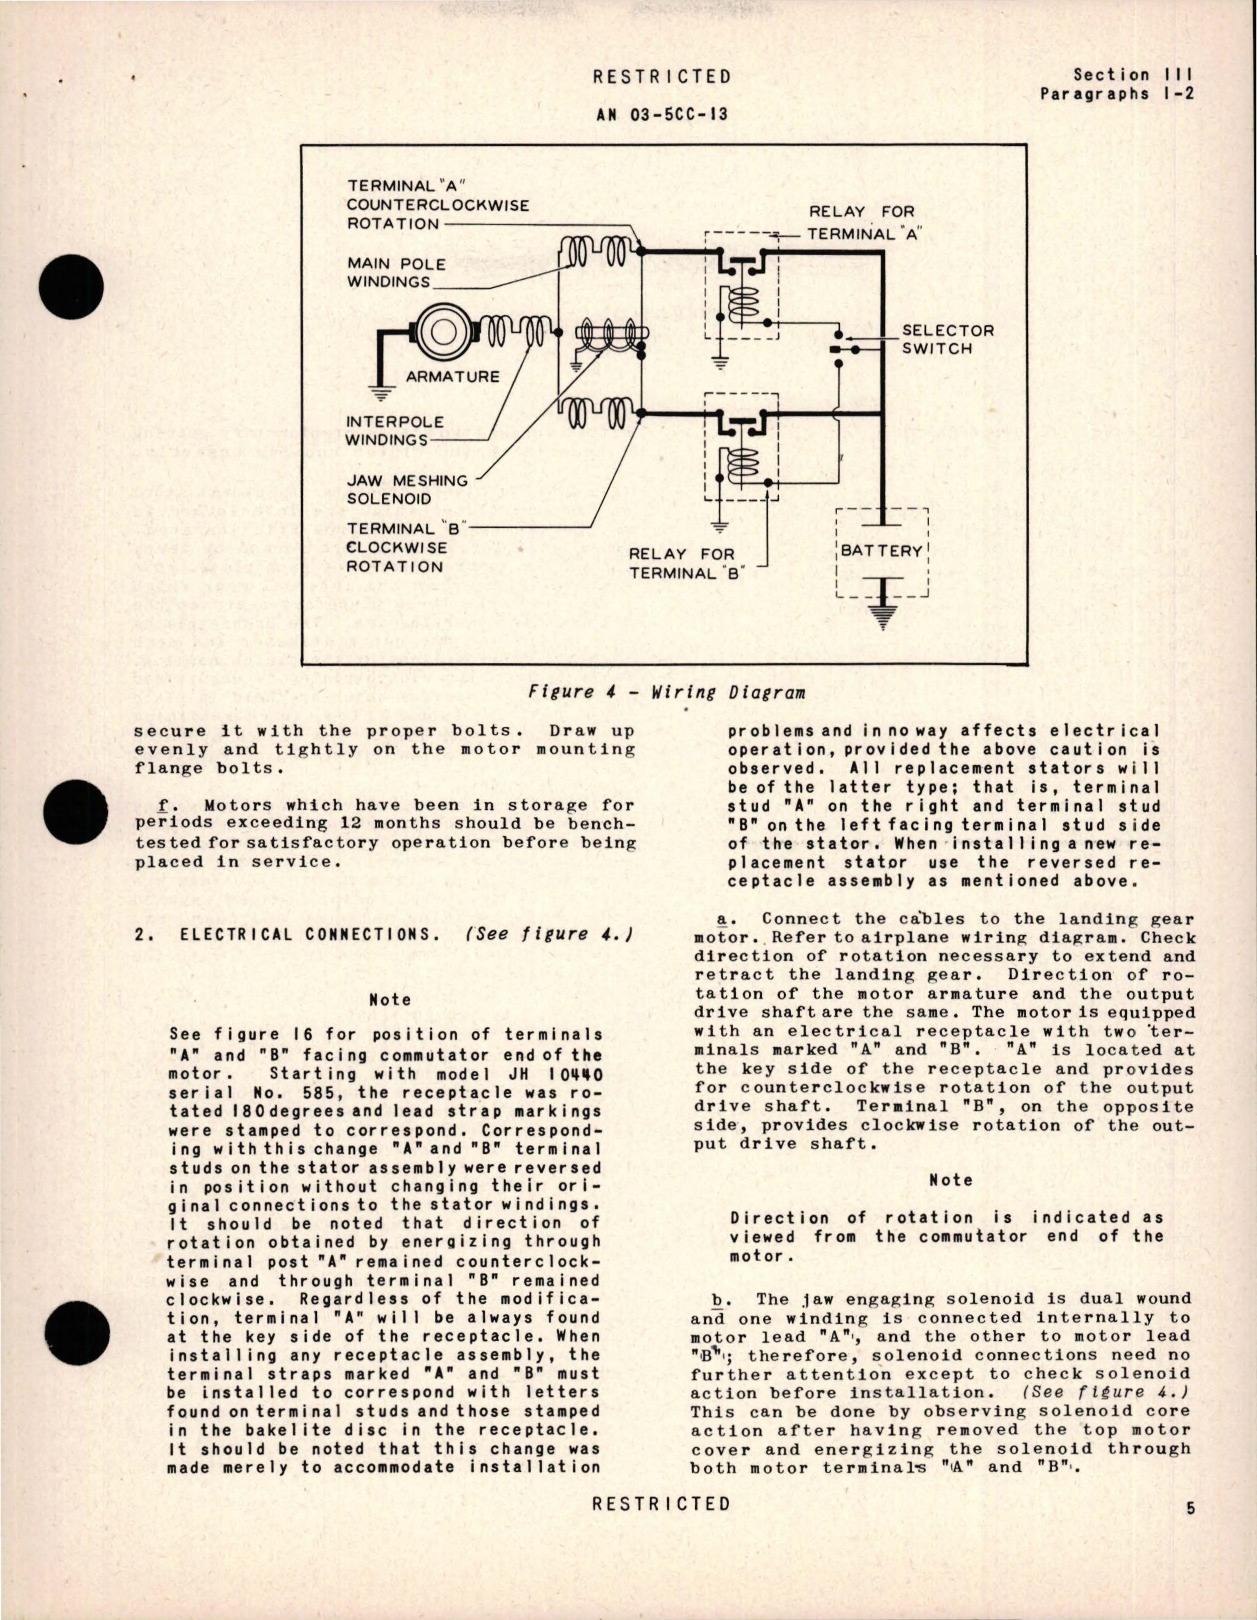 Sample page 9 from AirCorps Library document: Instructions with Parts Catalog for Landing Wheel Retracting Motor - Model JH 10440